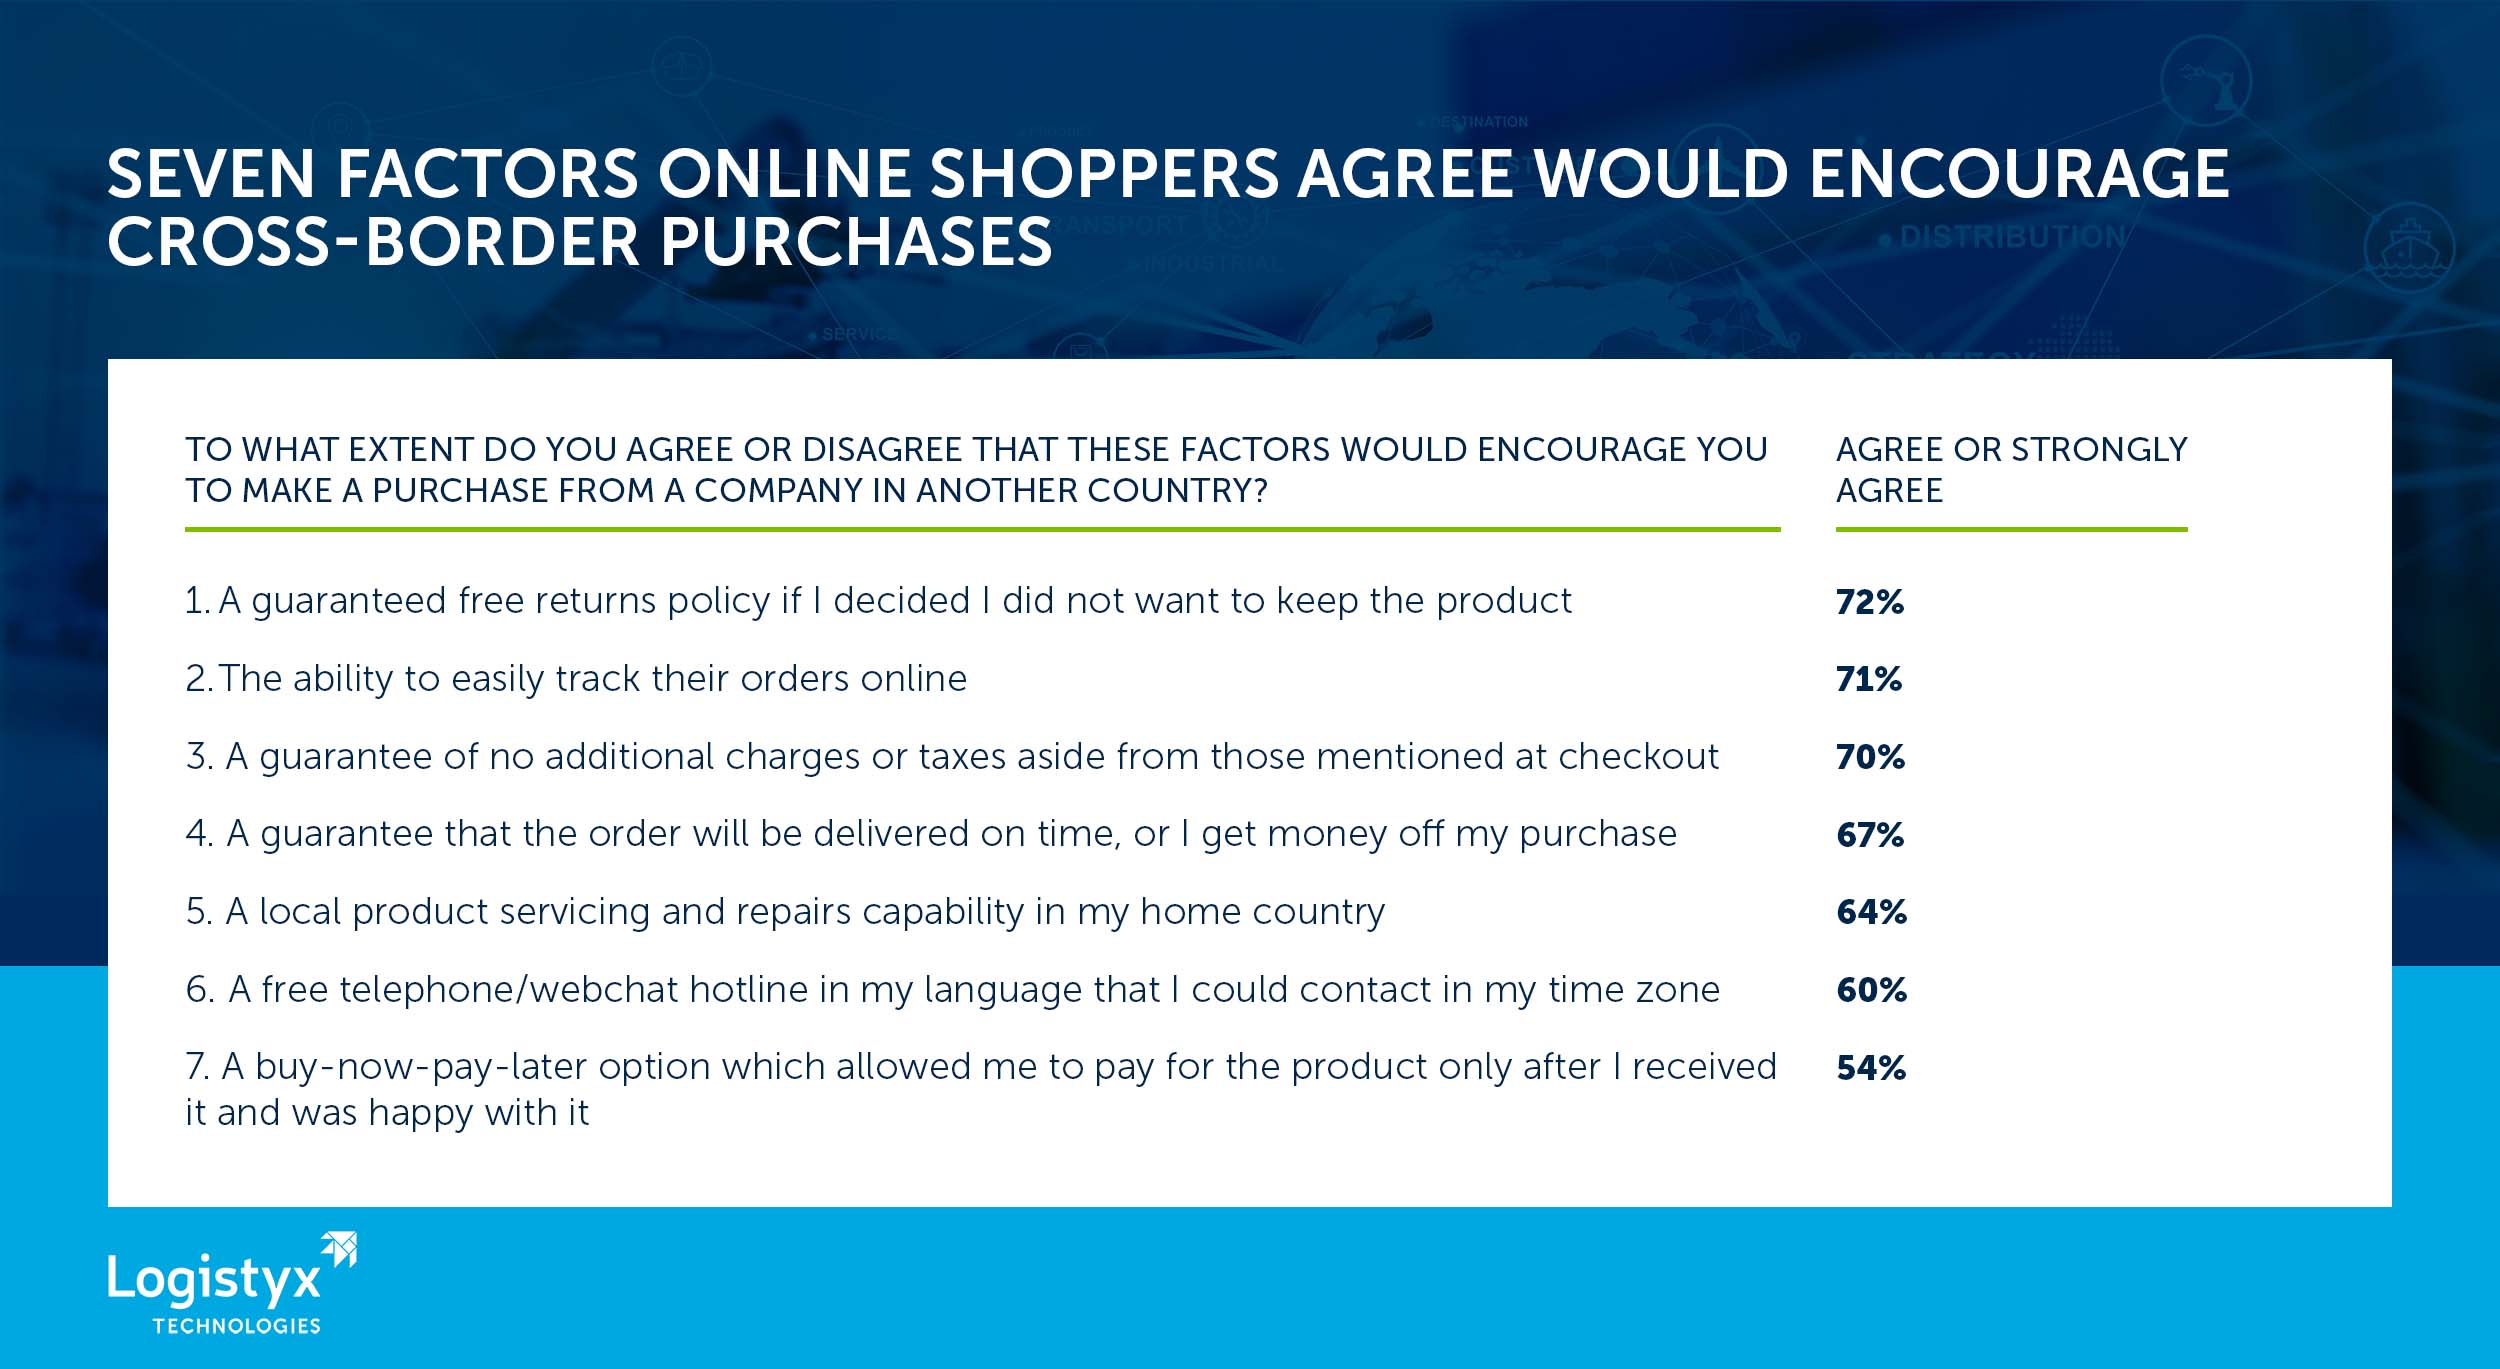 Respondent answers to: To what extent do you agree or disagree that these factors would encourage you to make a purchase from a company in another country? Shows percentage of respondents that either agree or strongly agree to the following: 1. A guaranteed free returns policy if I decided I did not want to keep the product, 72% 2. The ability to easily track their orders online, 72% 3. A guarantee of no additional charges or taxes aside from those mentioned at checkout, 70% 4. A guarantee that the order will be delivered on time, or I get money off my purchase, 67% 5. A local product servicing and repairs capability in my home country, 64% 6. A free telephone/webchat hotline in my language that I could contact in my time zone, 60% 7. A buy-now-pay-later option which allowed me to pay for the product only after I received it and was happy with it, 54%.